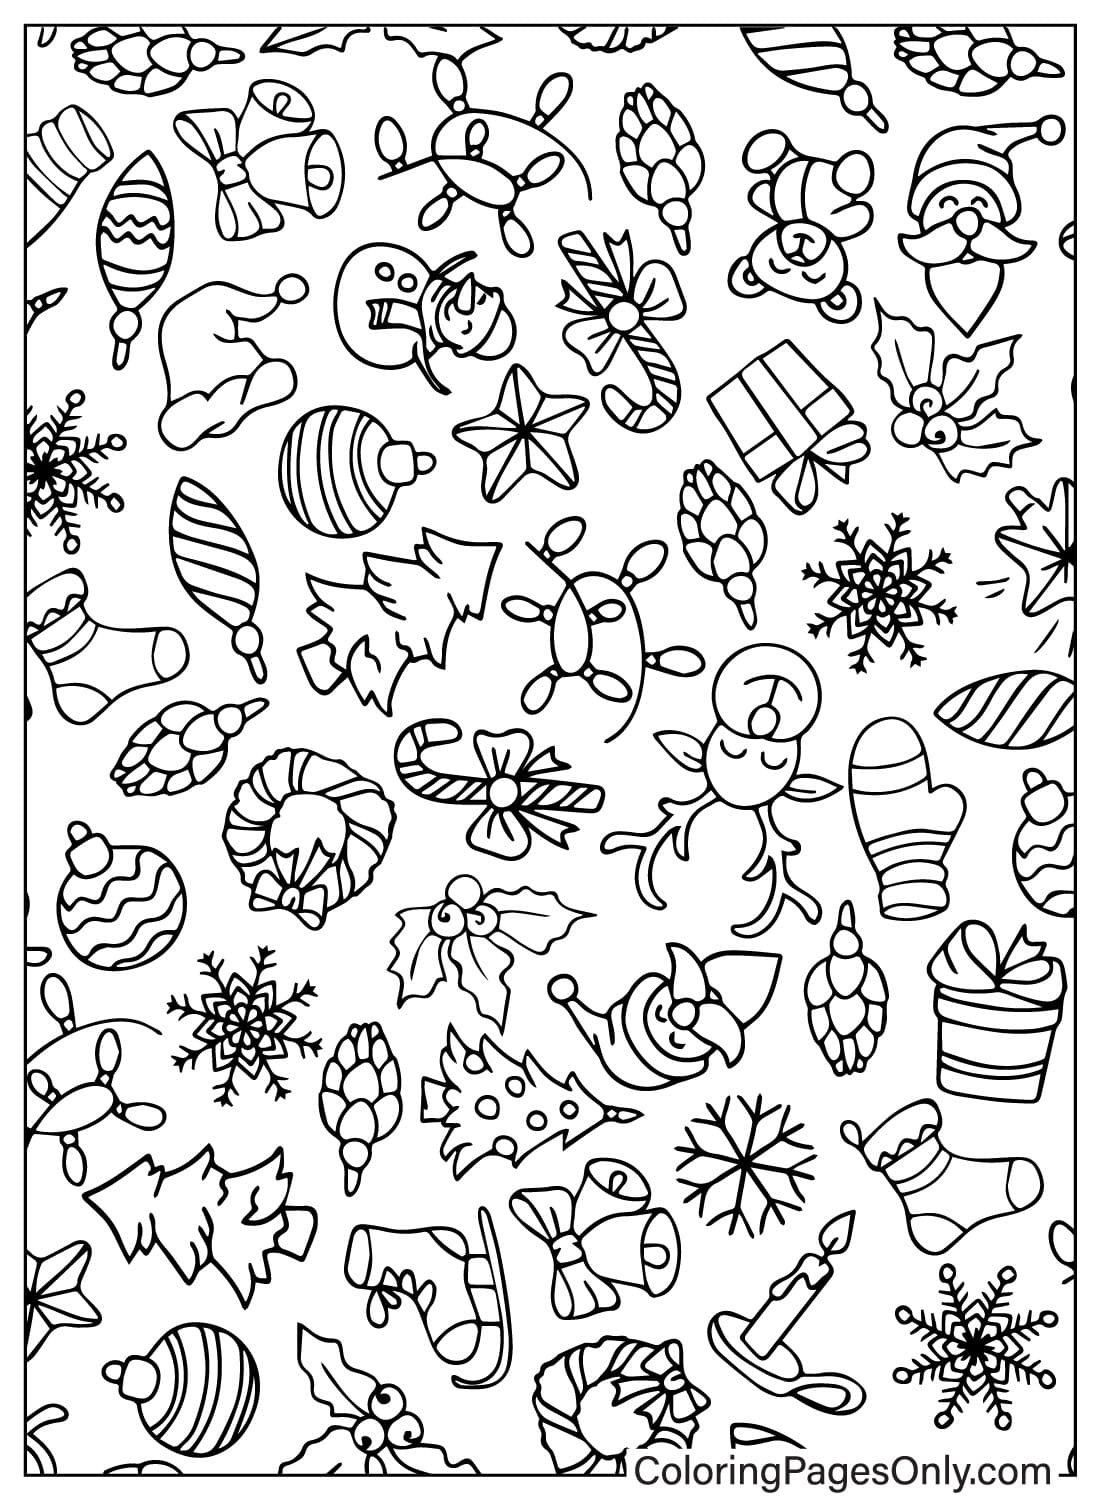 Free Christmas Pattern Coloring Page from Christmas Pattern